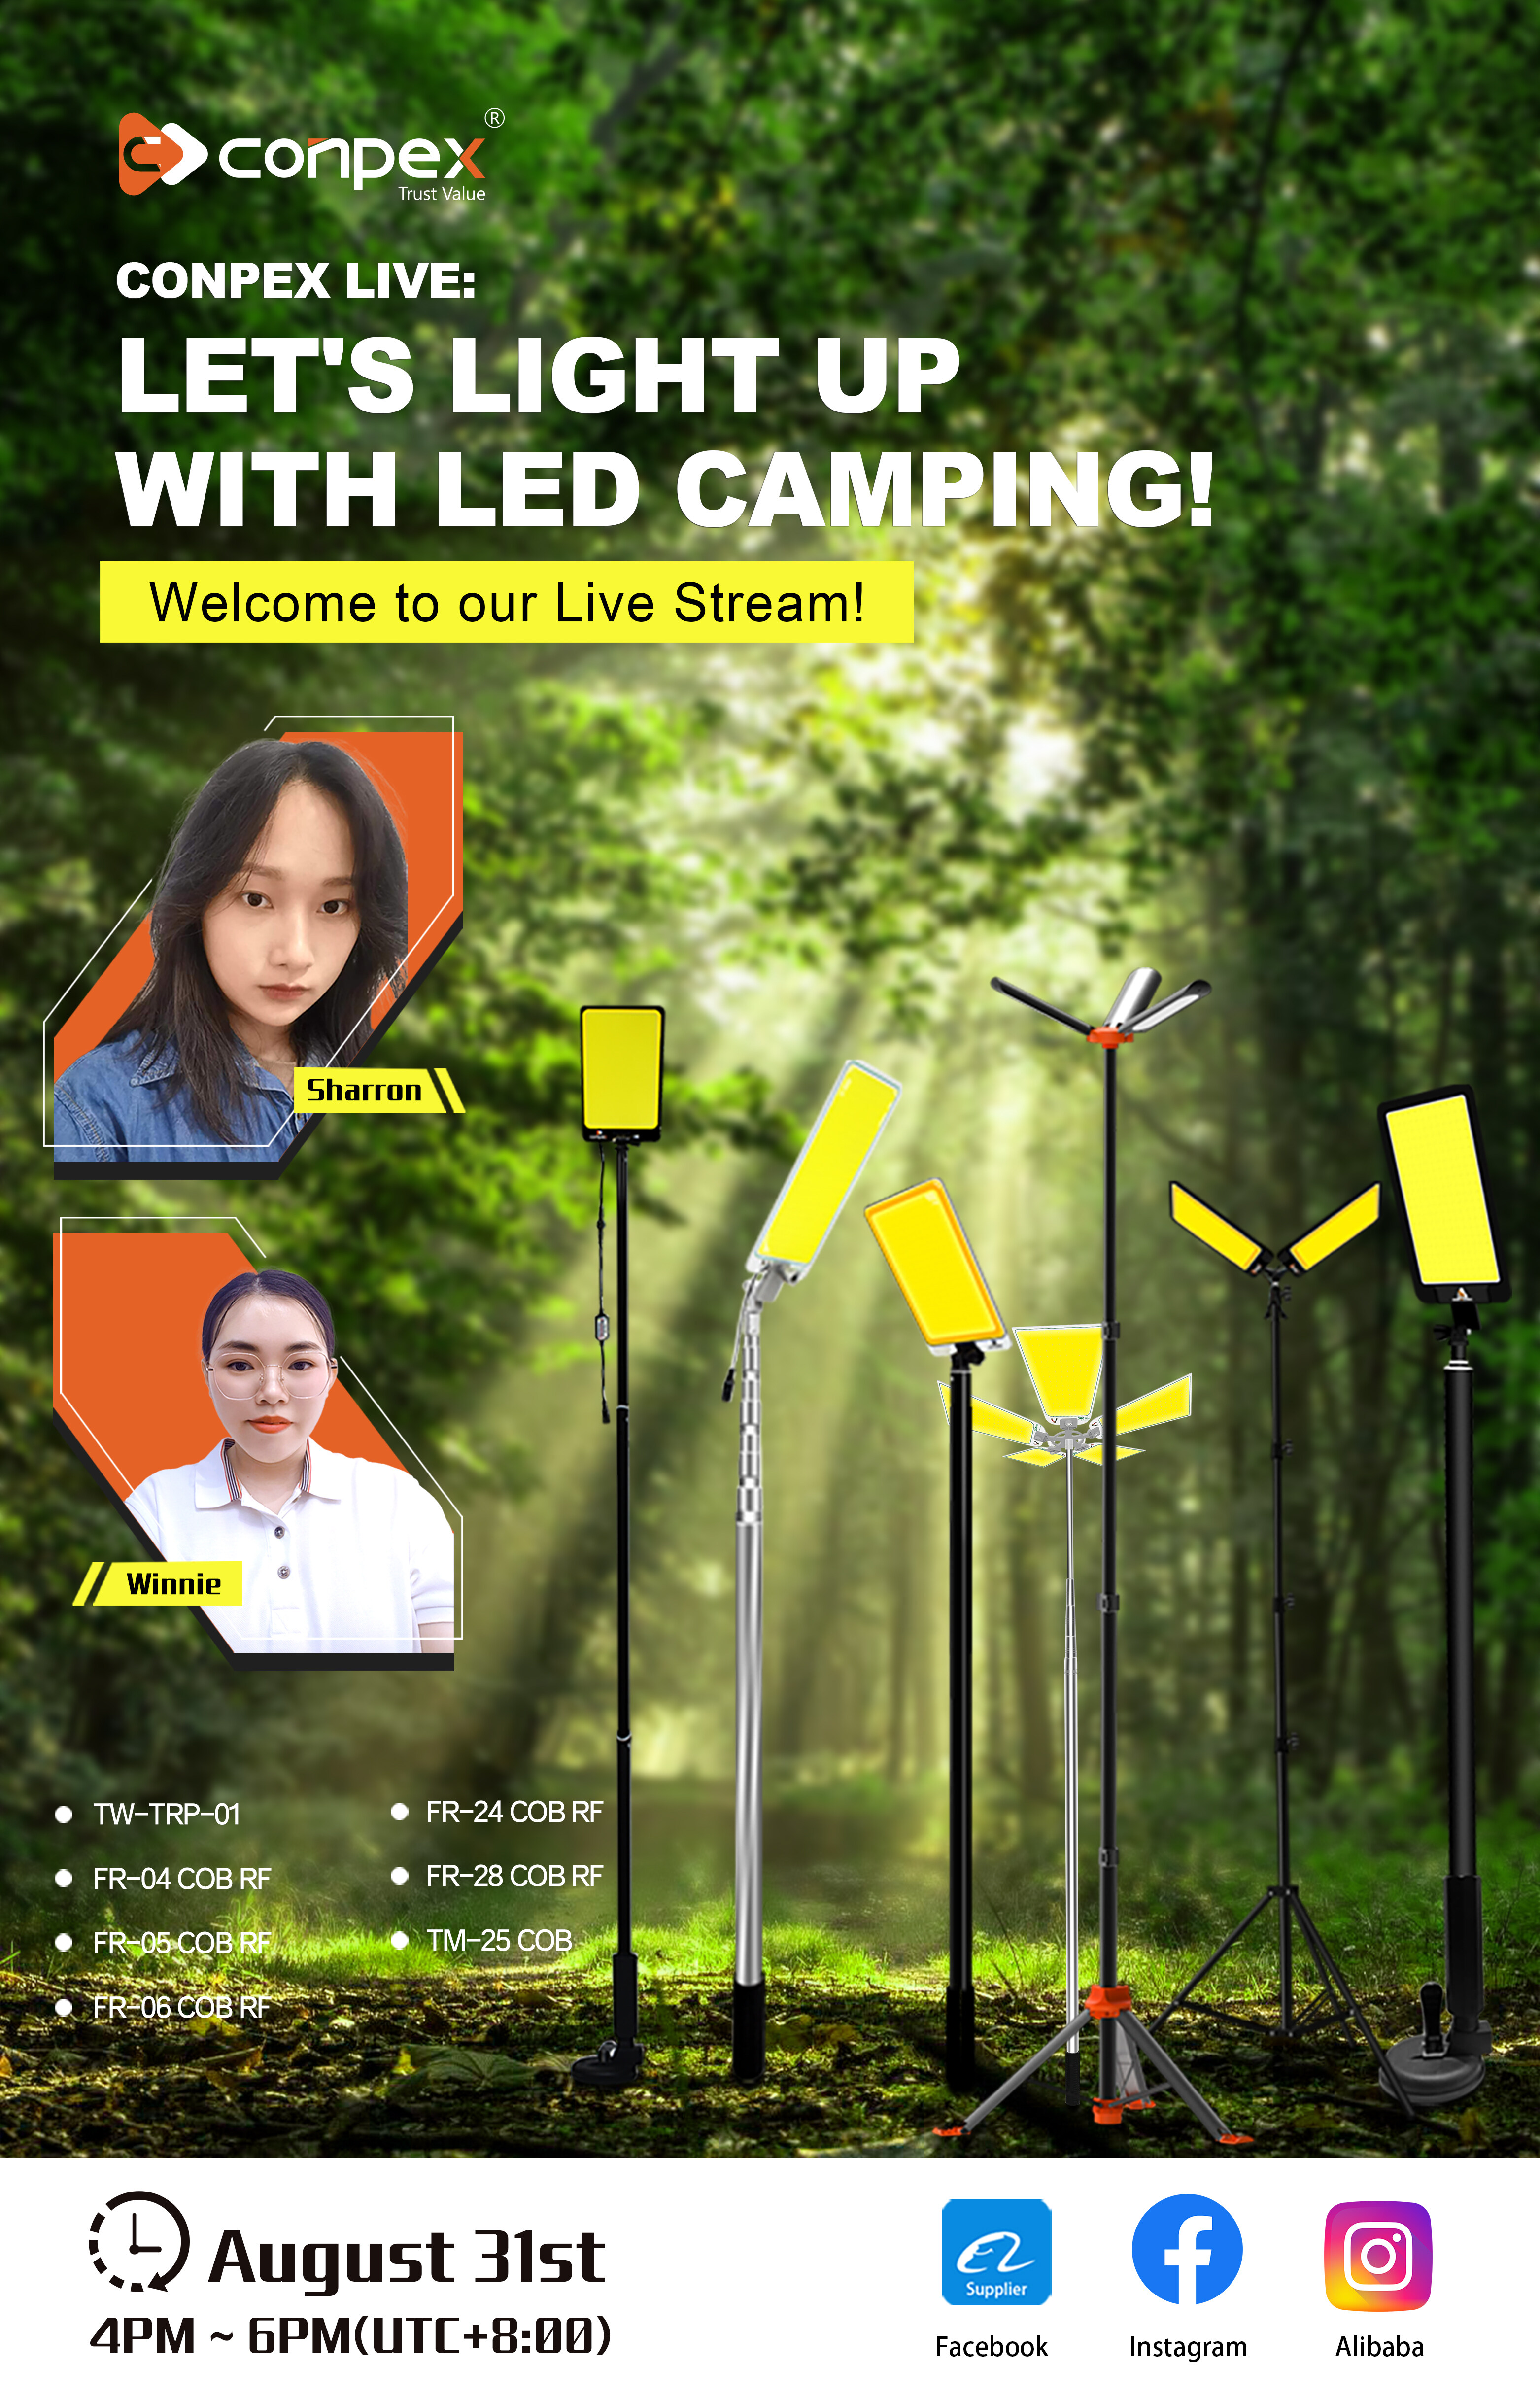 Conpex Live: Let's Light Up with LED Camping!